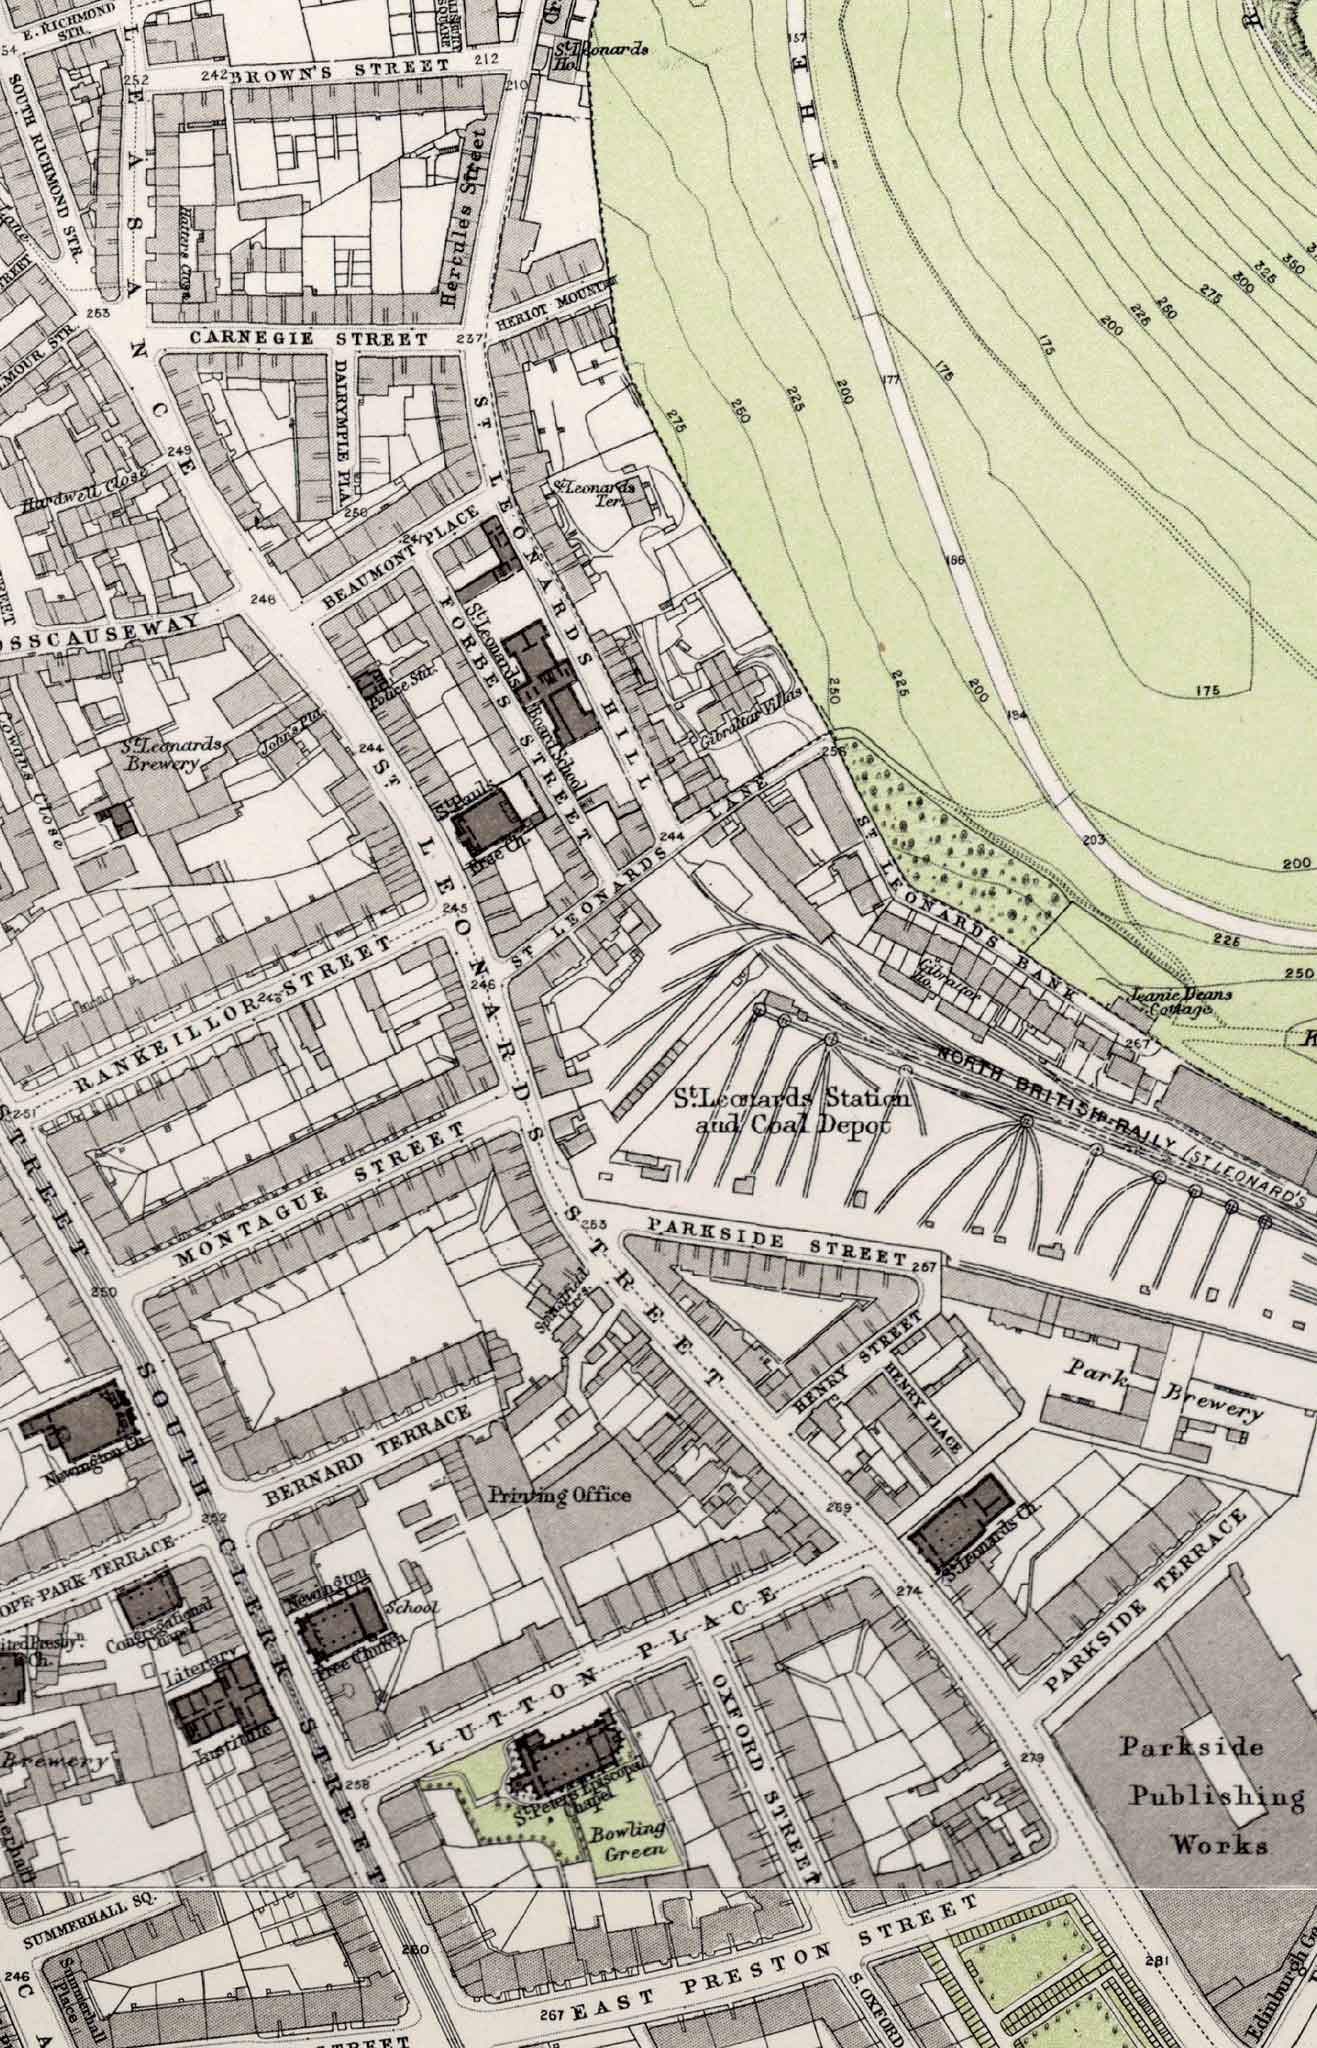 Edinburgh Old Town  -  Extract from a Bartholemew Map, 1891  -  Dumbiedykes